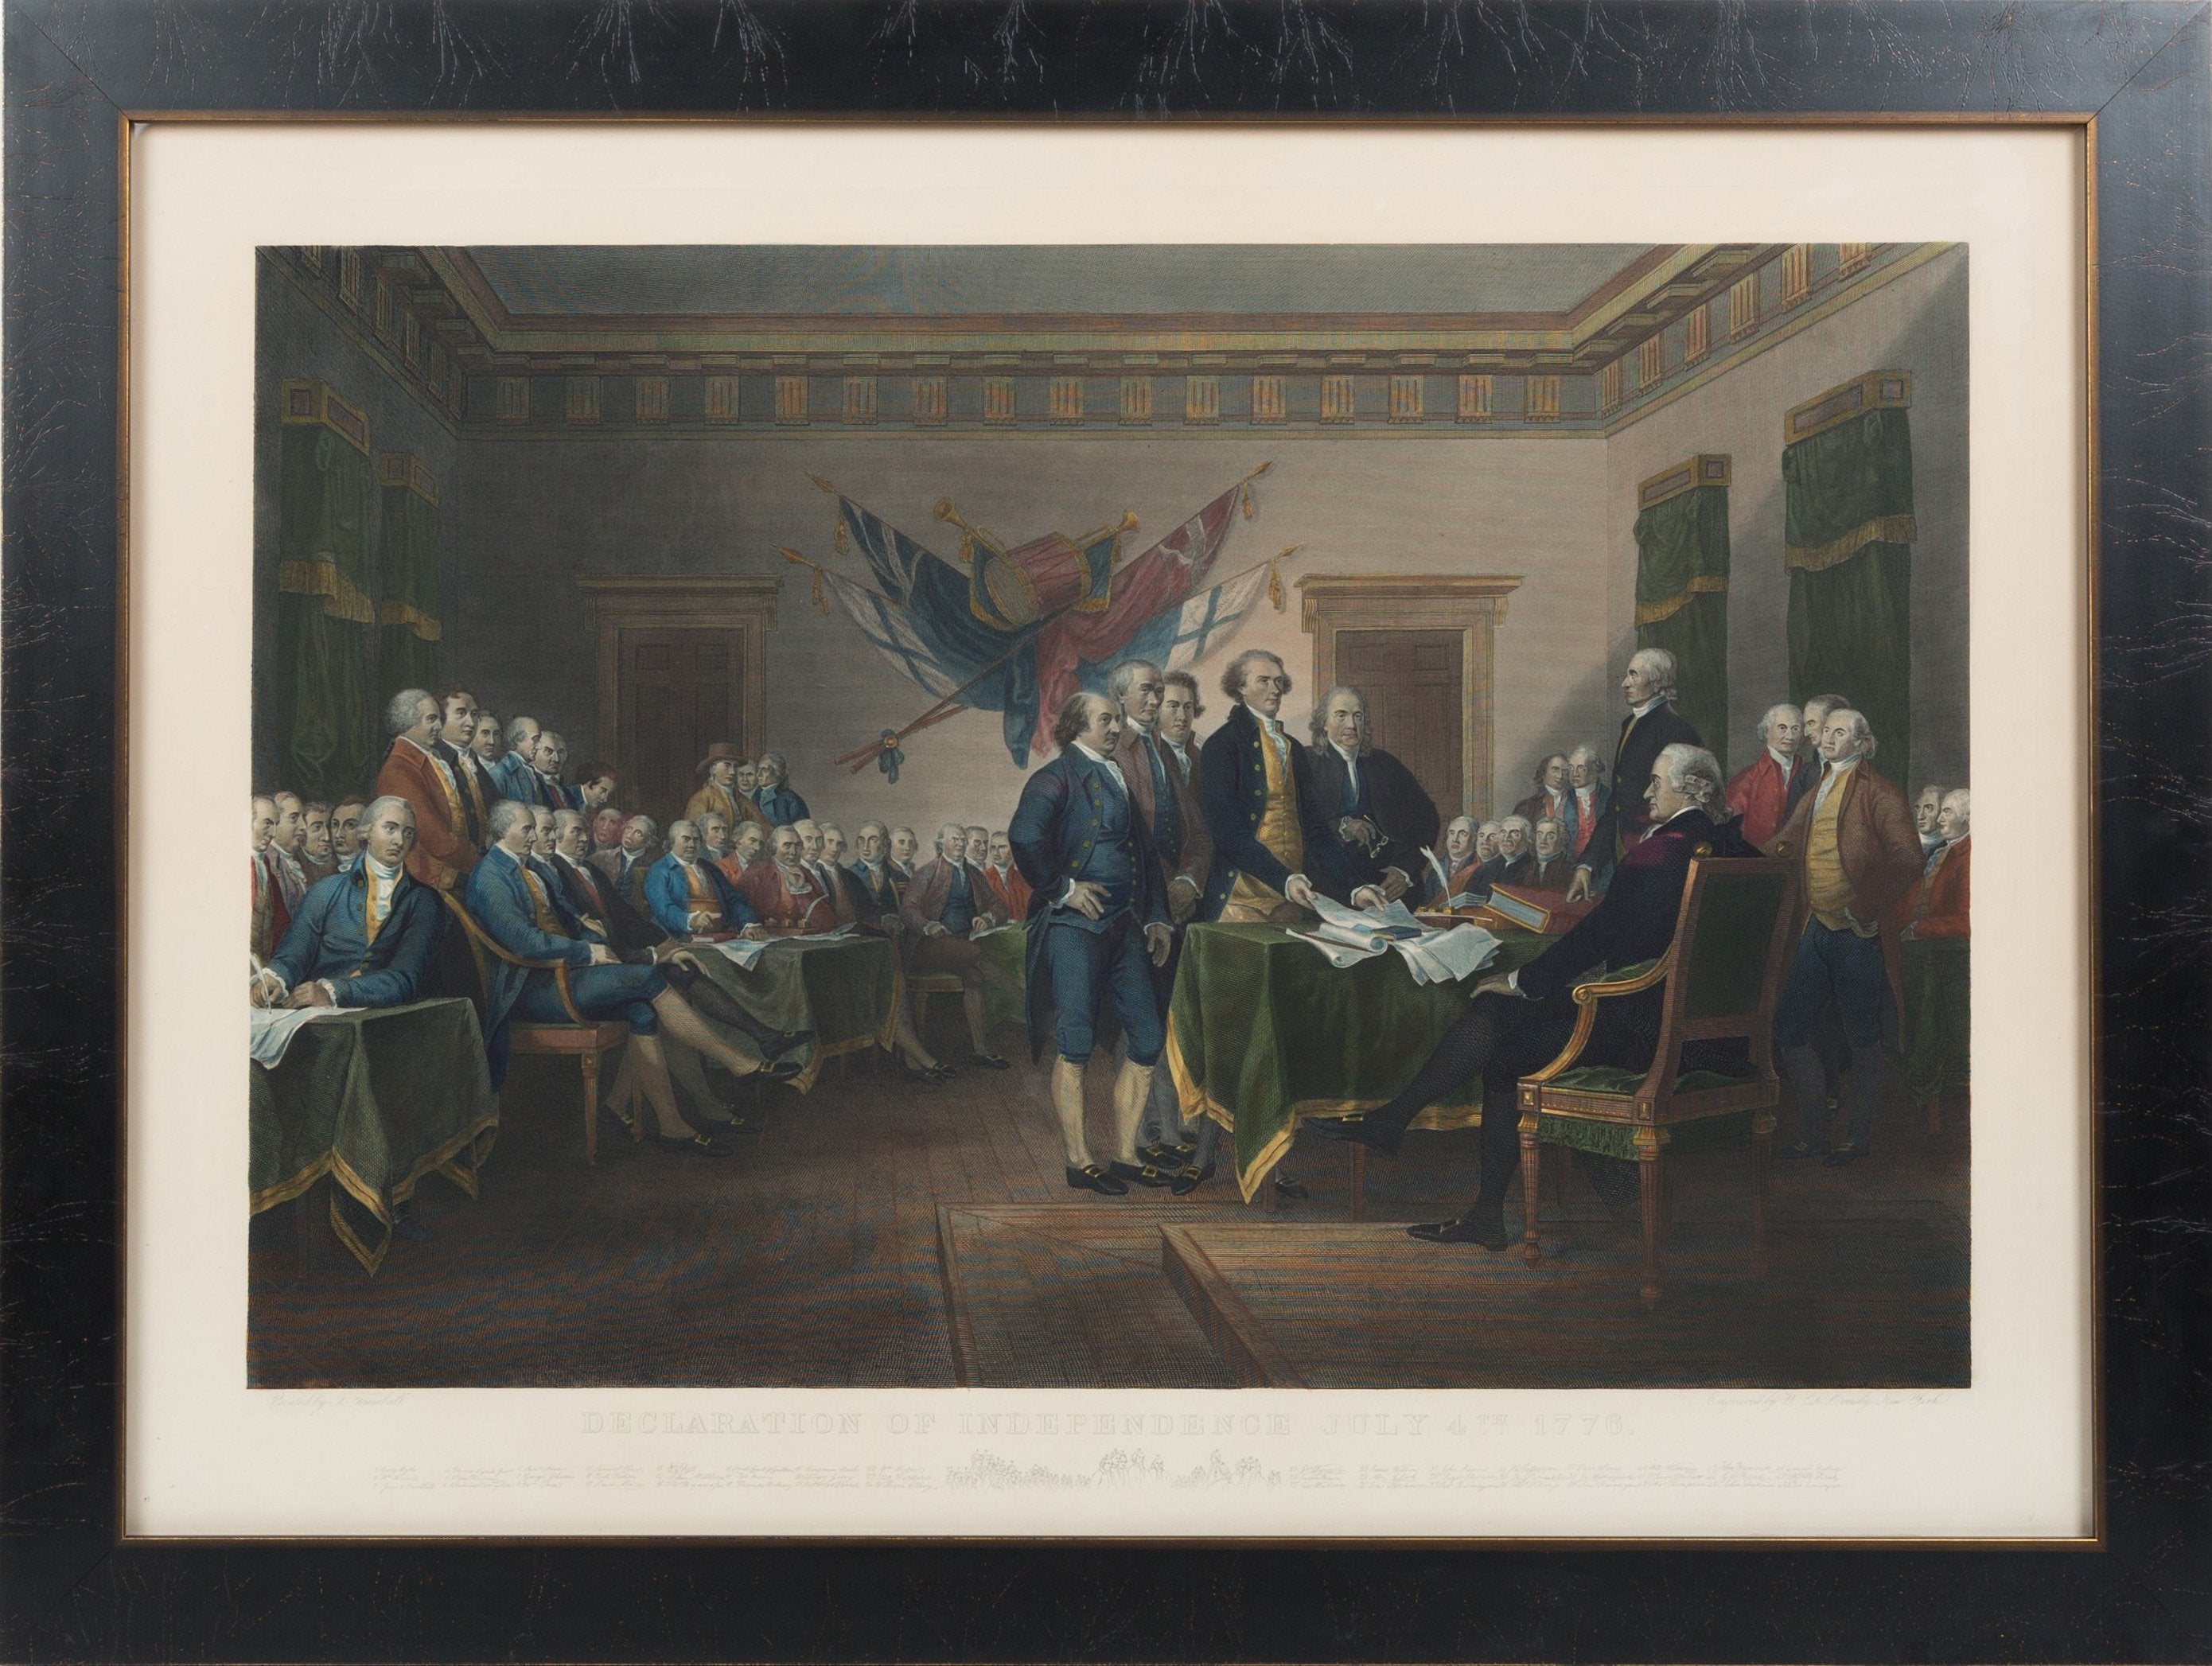 Trumbull's "Declaration of Independence" Depiction